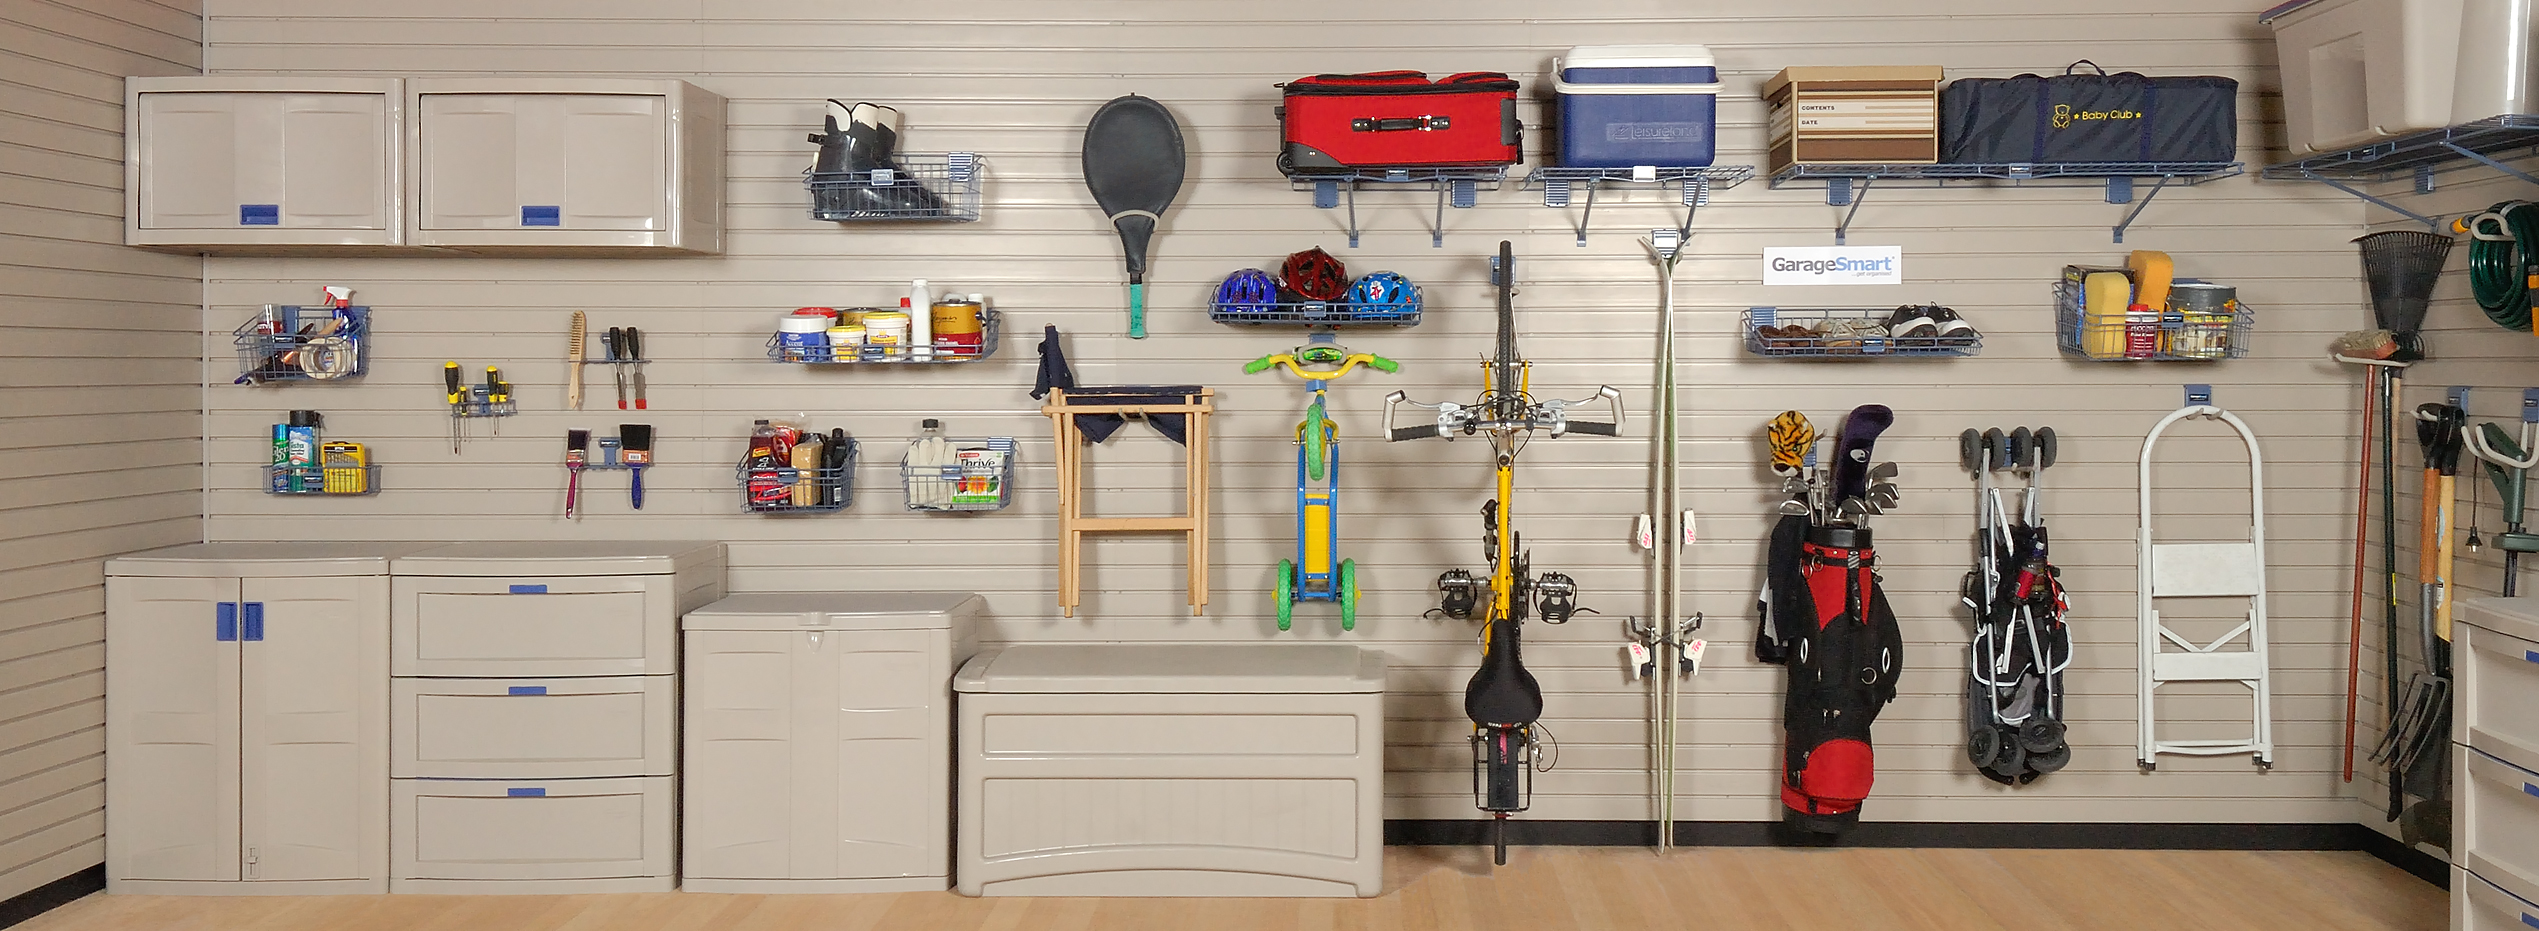 garage wall with hanging tools and sports equipment